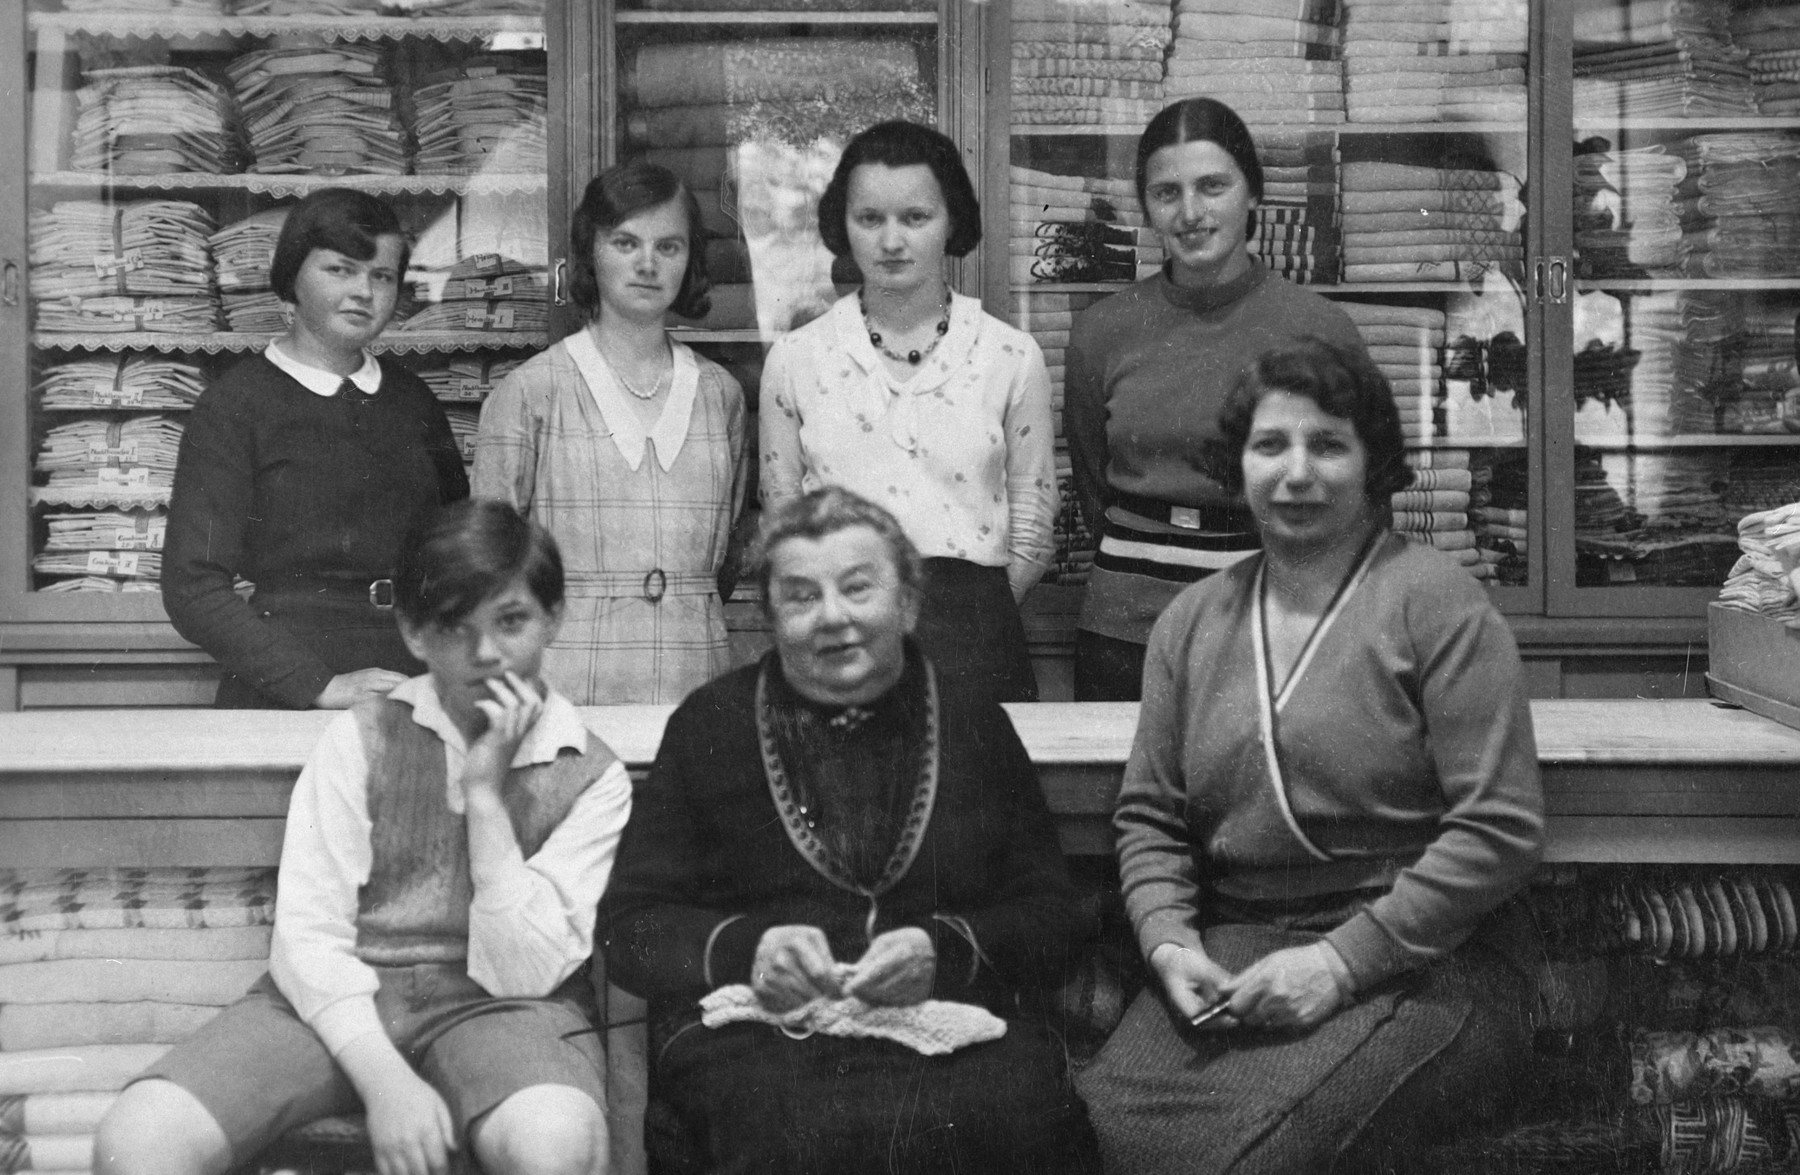 The Jewish owners of a dry goods store in Marienbad pose in front of the counter with other employees standing behind them.

Pictured in the center is Emma Kohn (grandmother of the donor) and on the right is Berta Schleissner (mother of the donor).